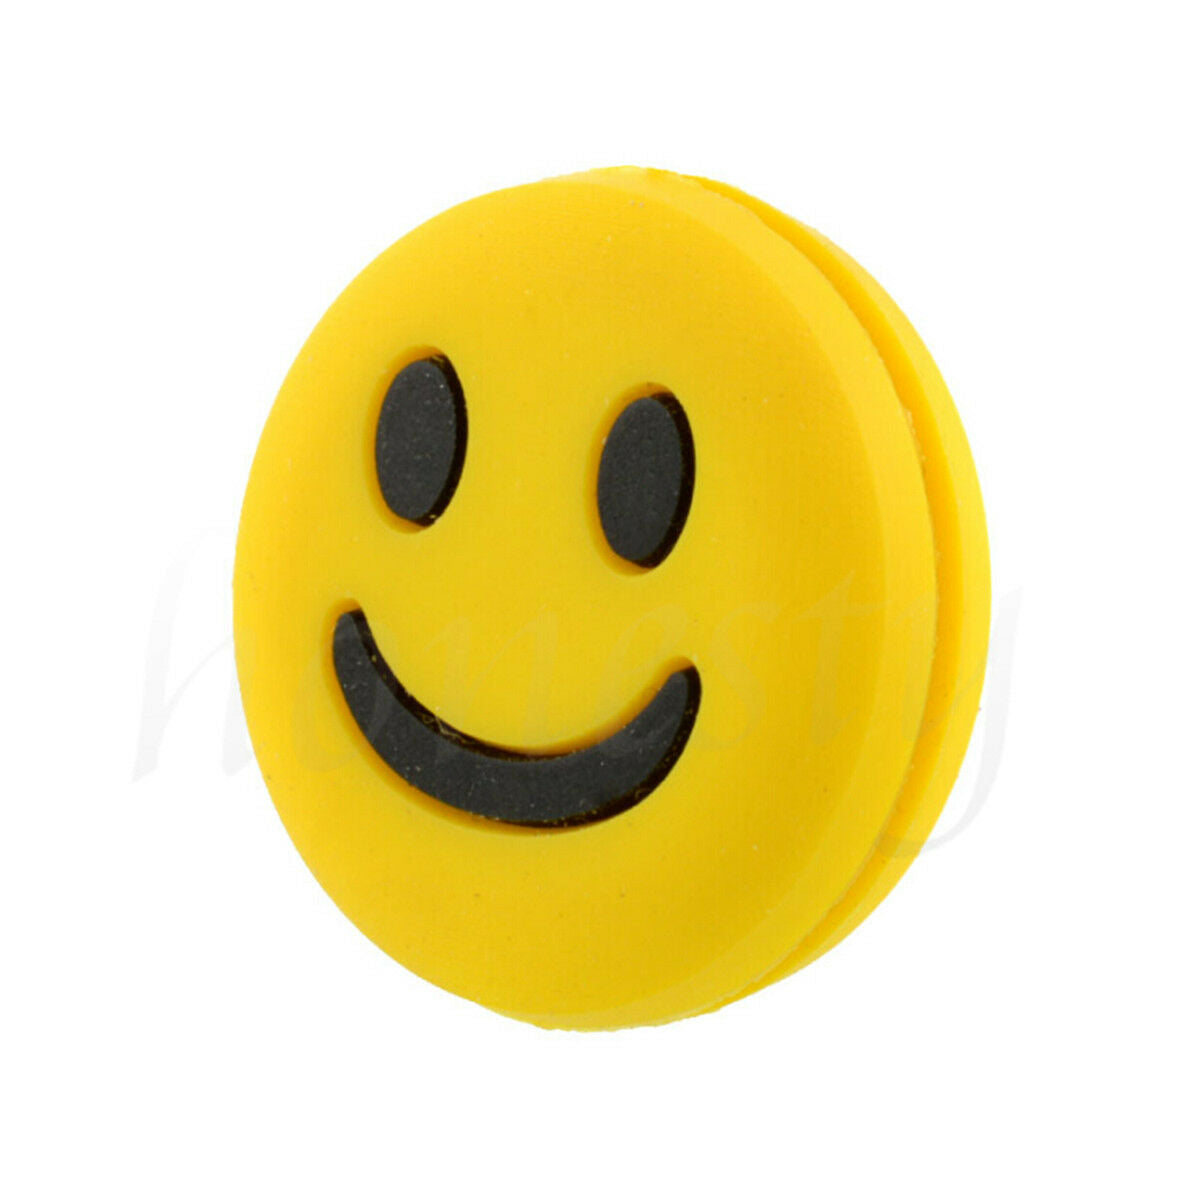 4pcs Silicone Rubber Smile Face Tennis Racquet Vibration Dampener Shock Absorber